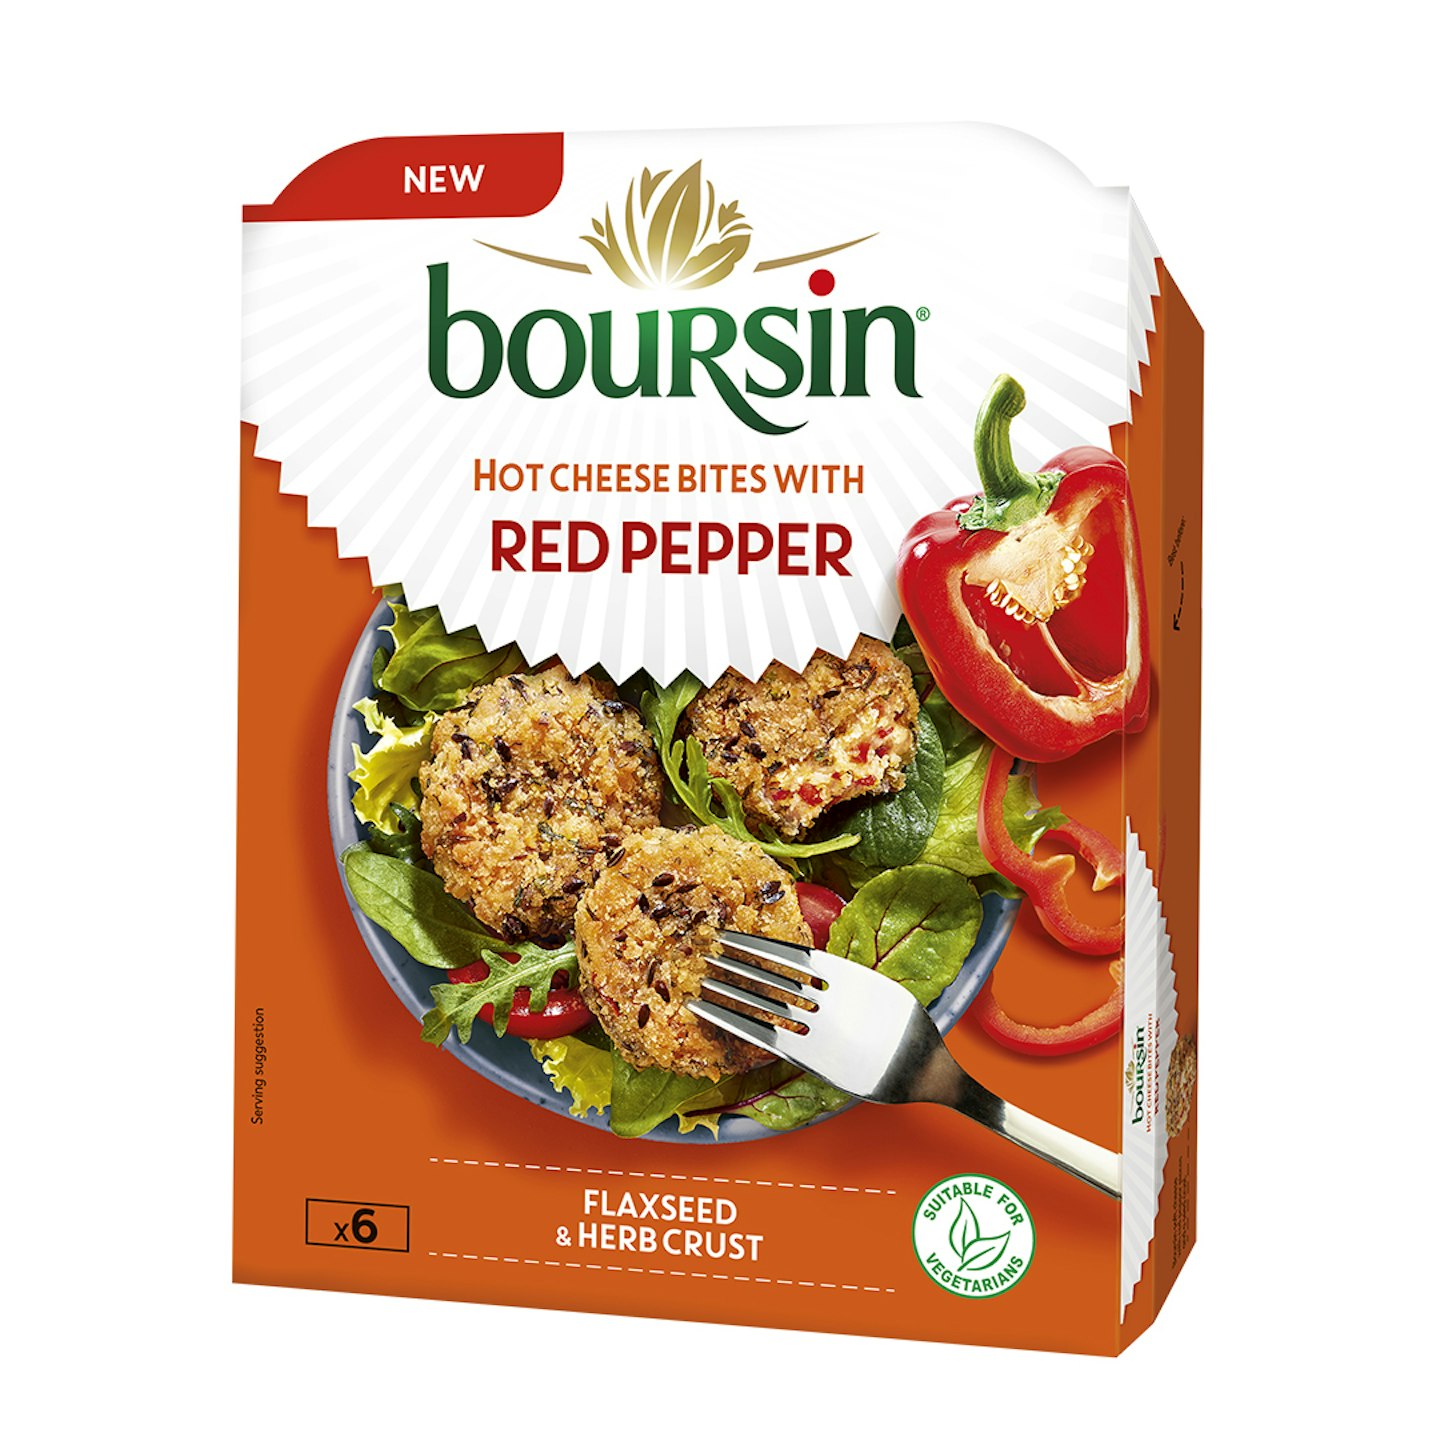 Boursin Hot Cheese Bites with Red Pepper